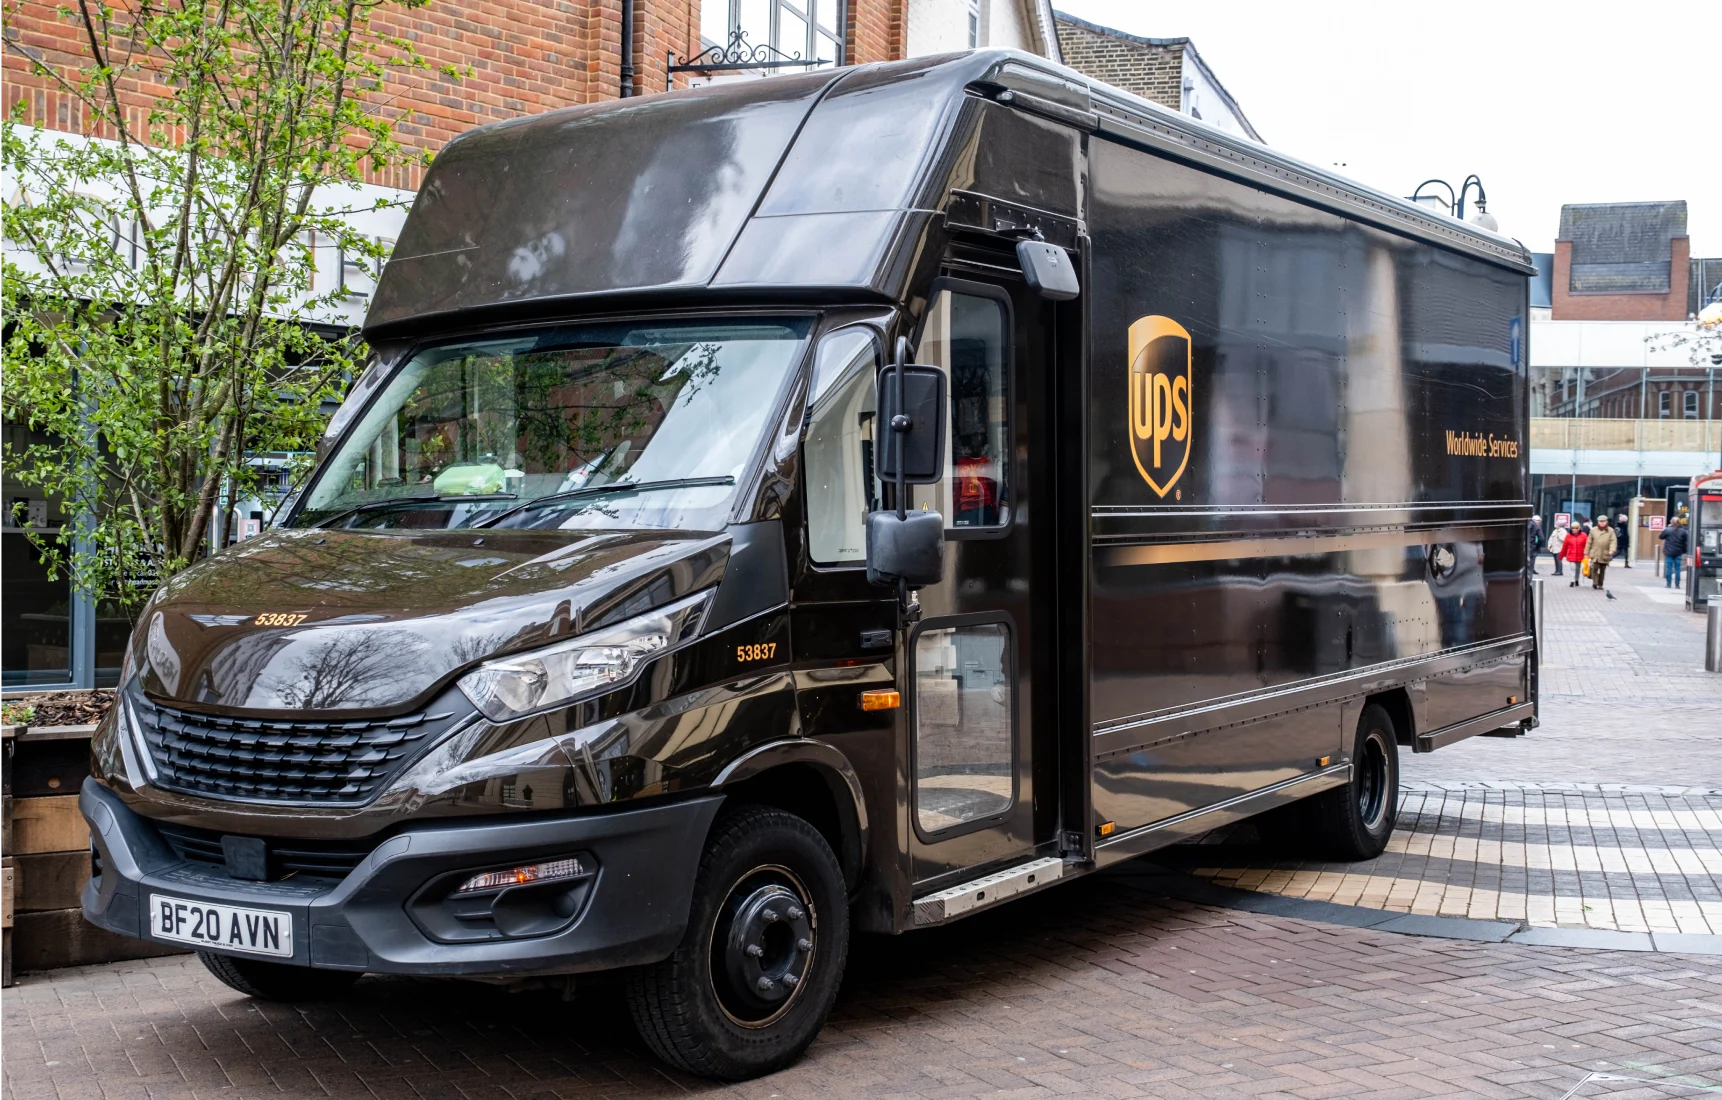 UPS Courier van parked on high street